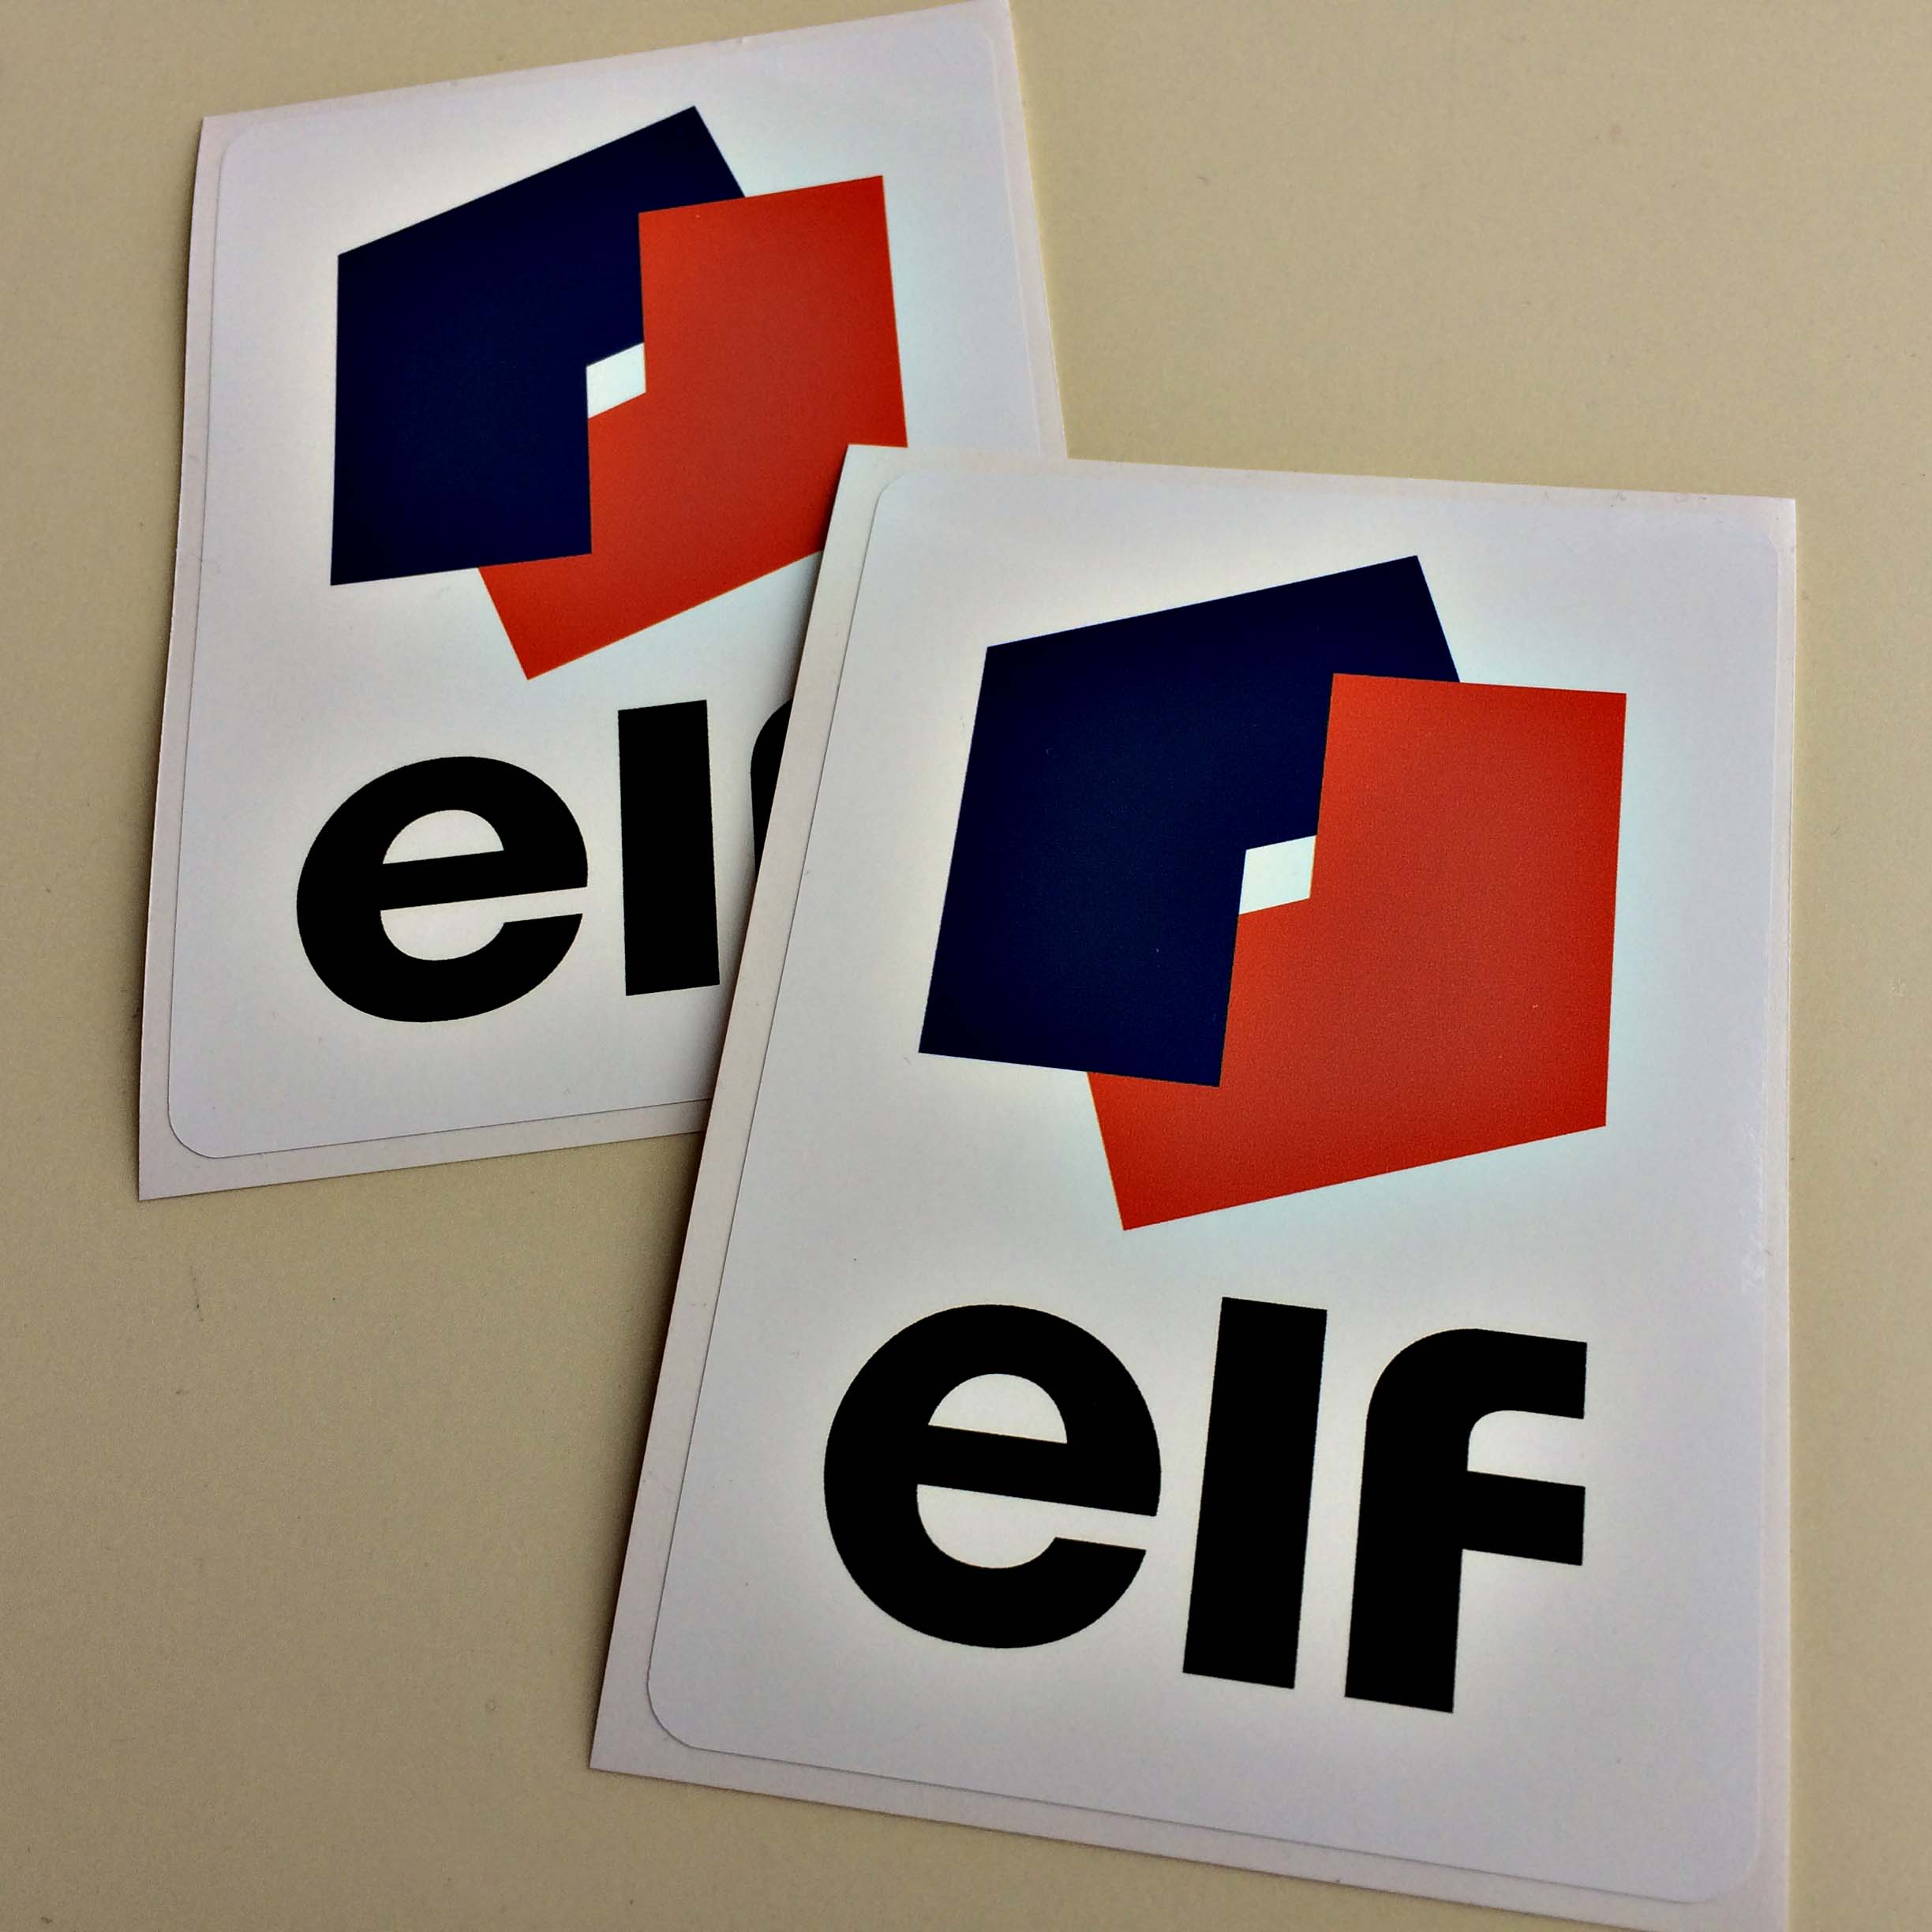 The Elf logo; two interlocking L shapes in blue and red on a white sticker with Elf in bold black lowercase lettering below.